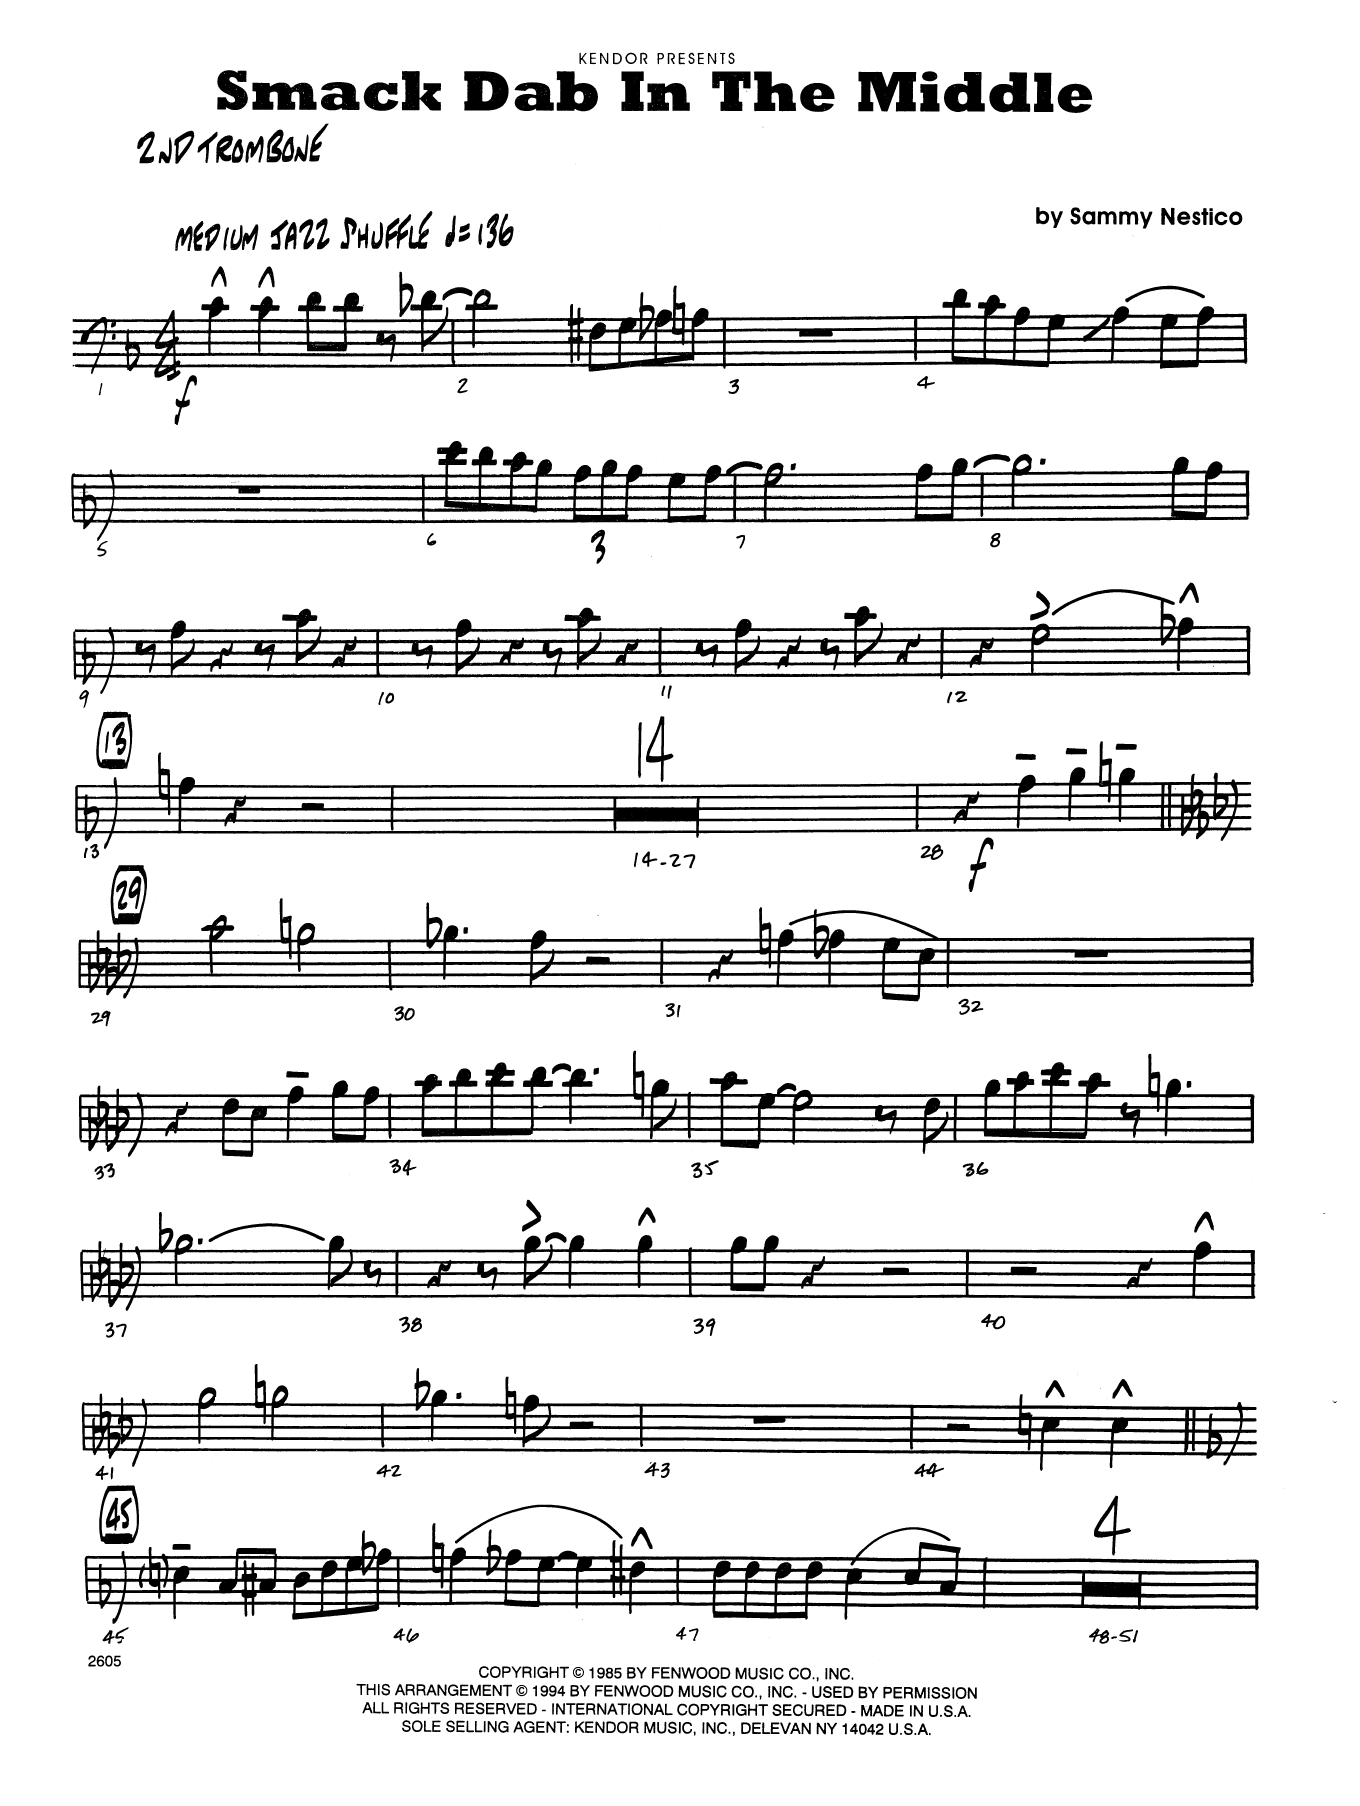 Download Sammy Nestico Smack Dab in the Middle - 2nd Trombone Sheet Music